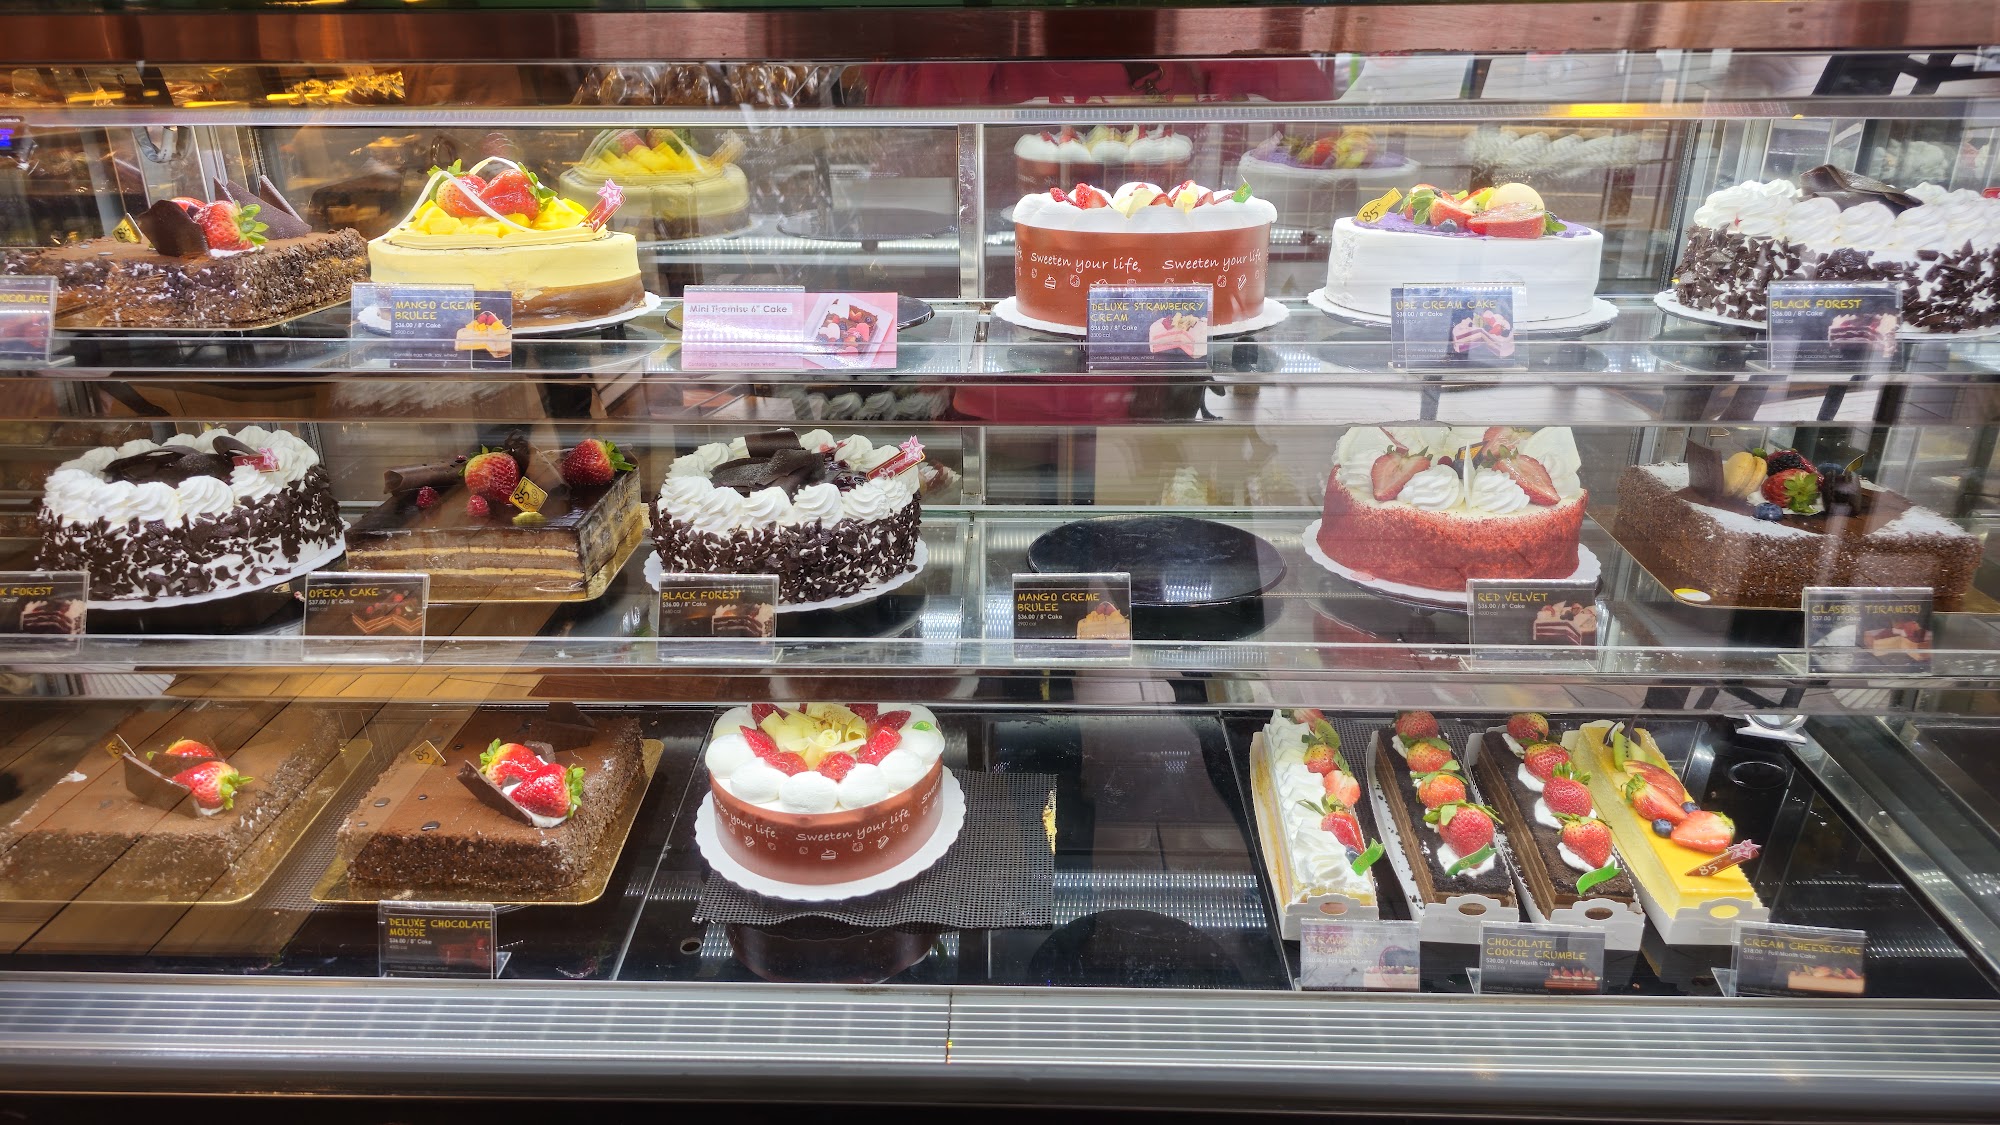 85°C Bakery Cafe - Federal Way